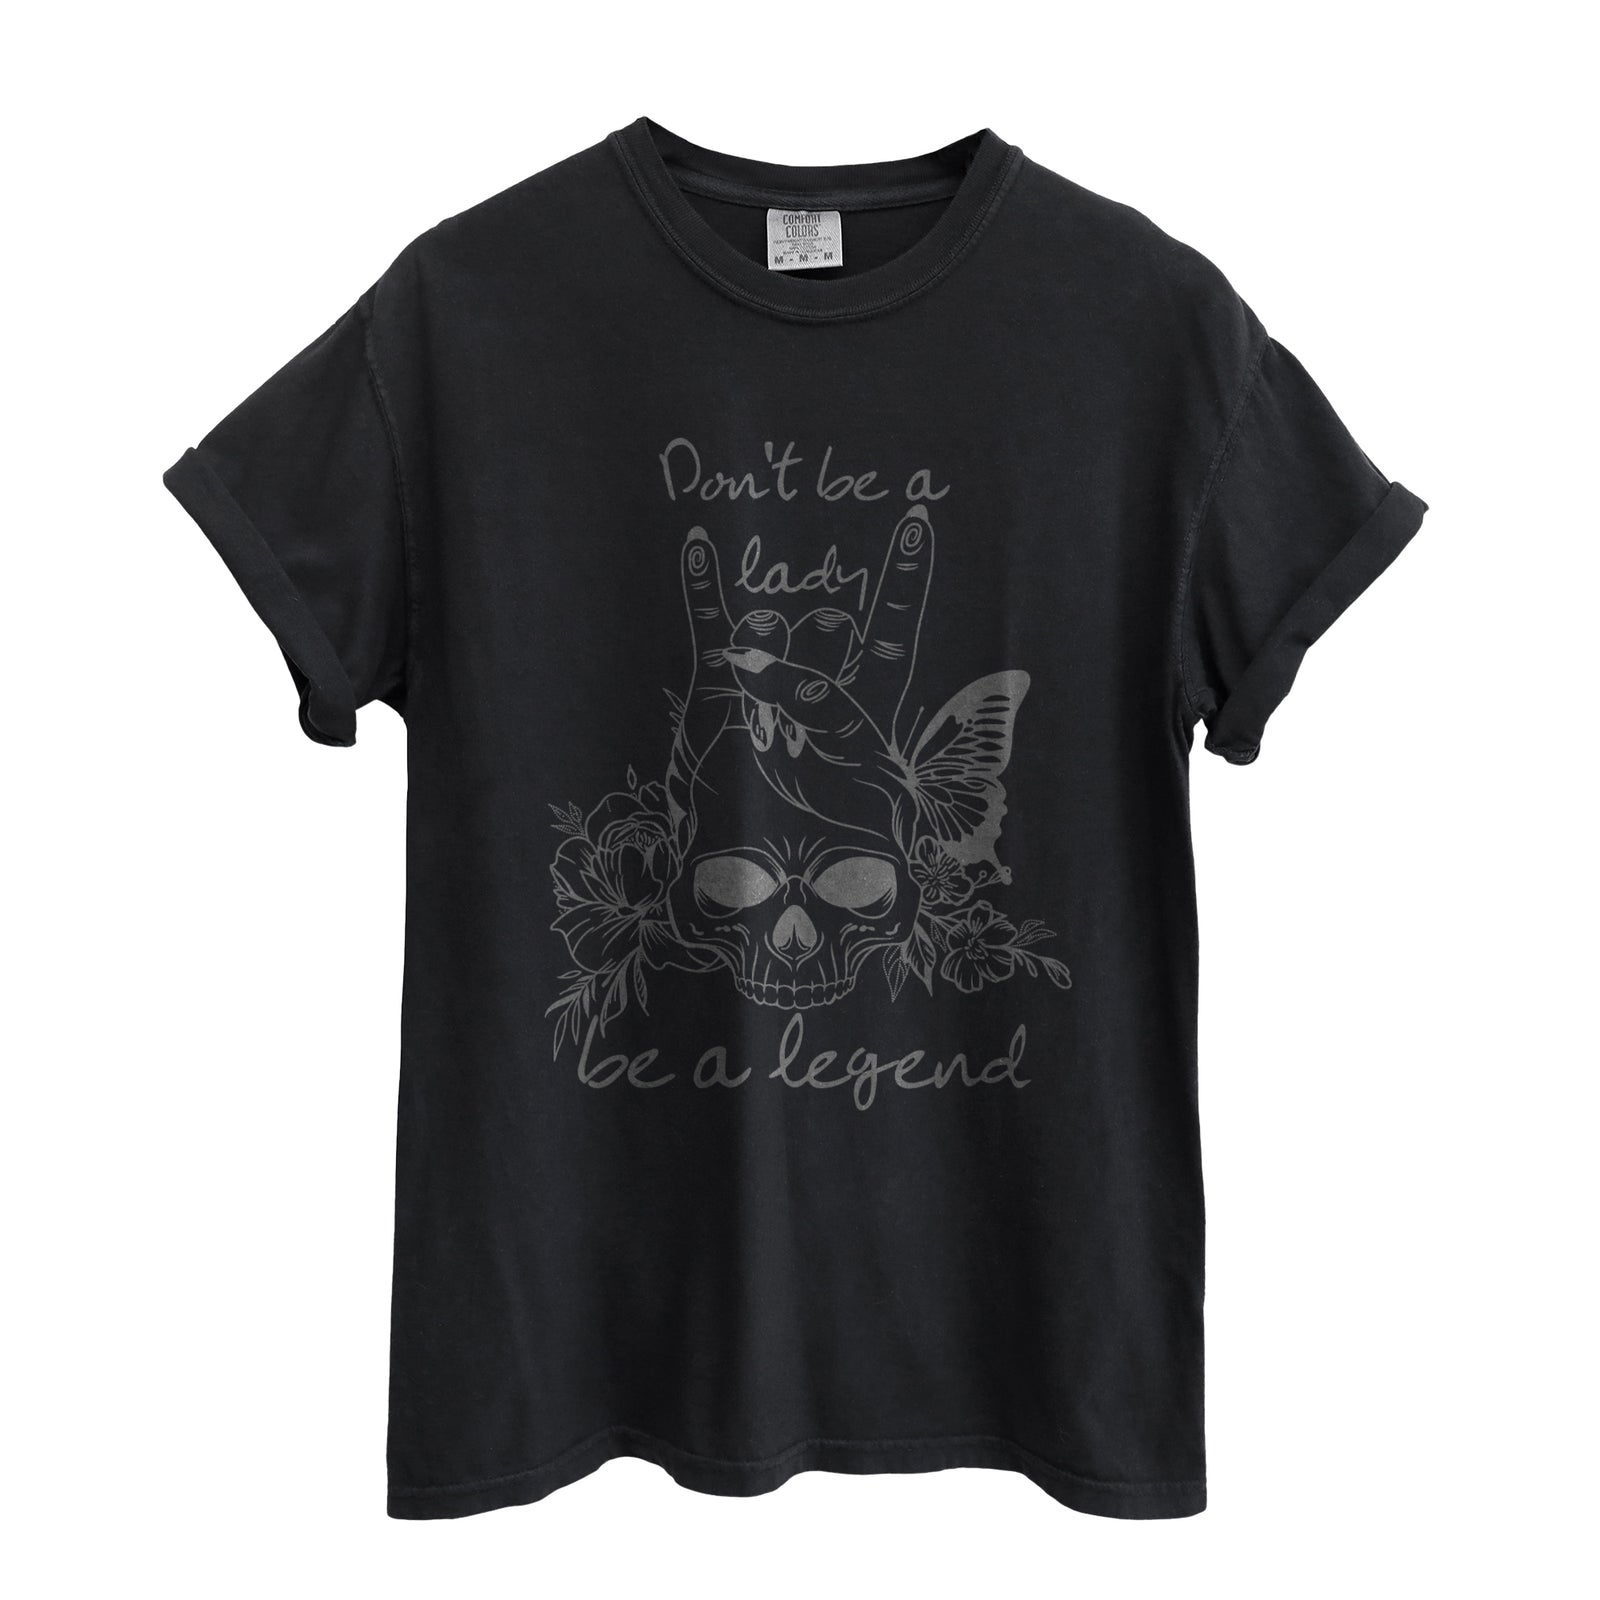 Don't be a Lady, Be a Legend Oversized Shirt for Women Garment-Dyed Graphic Tee